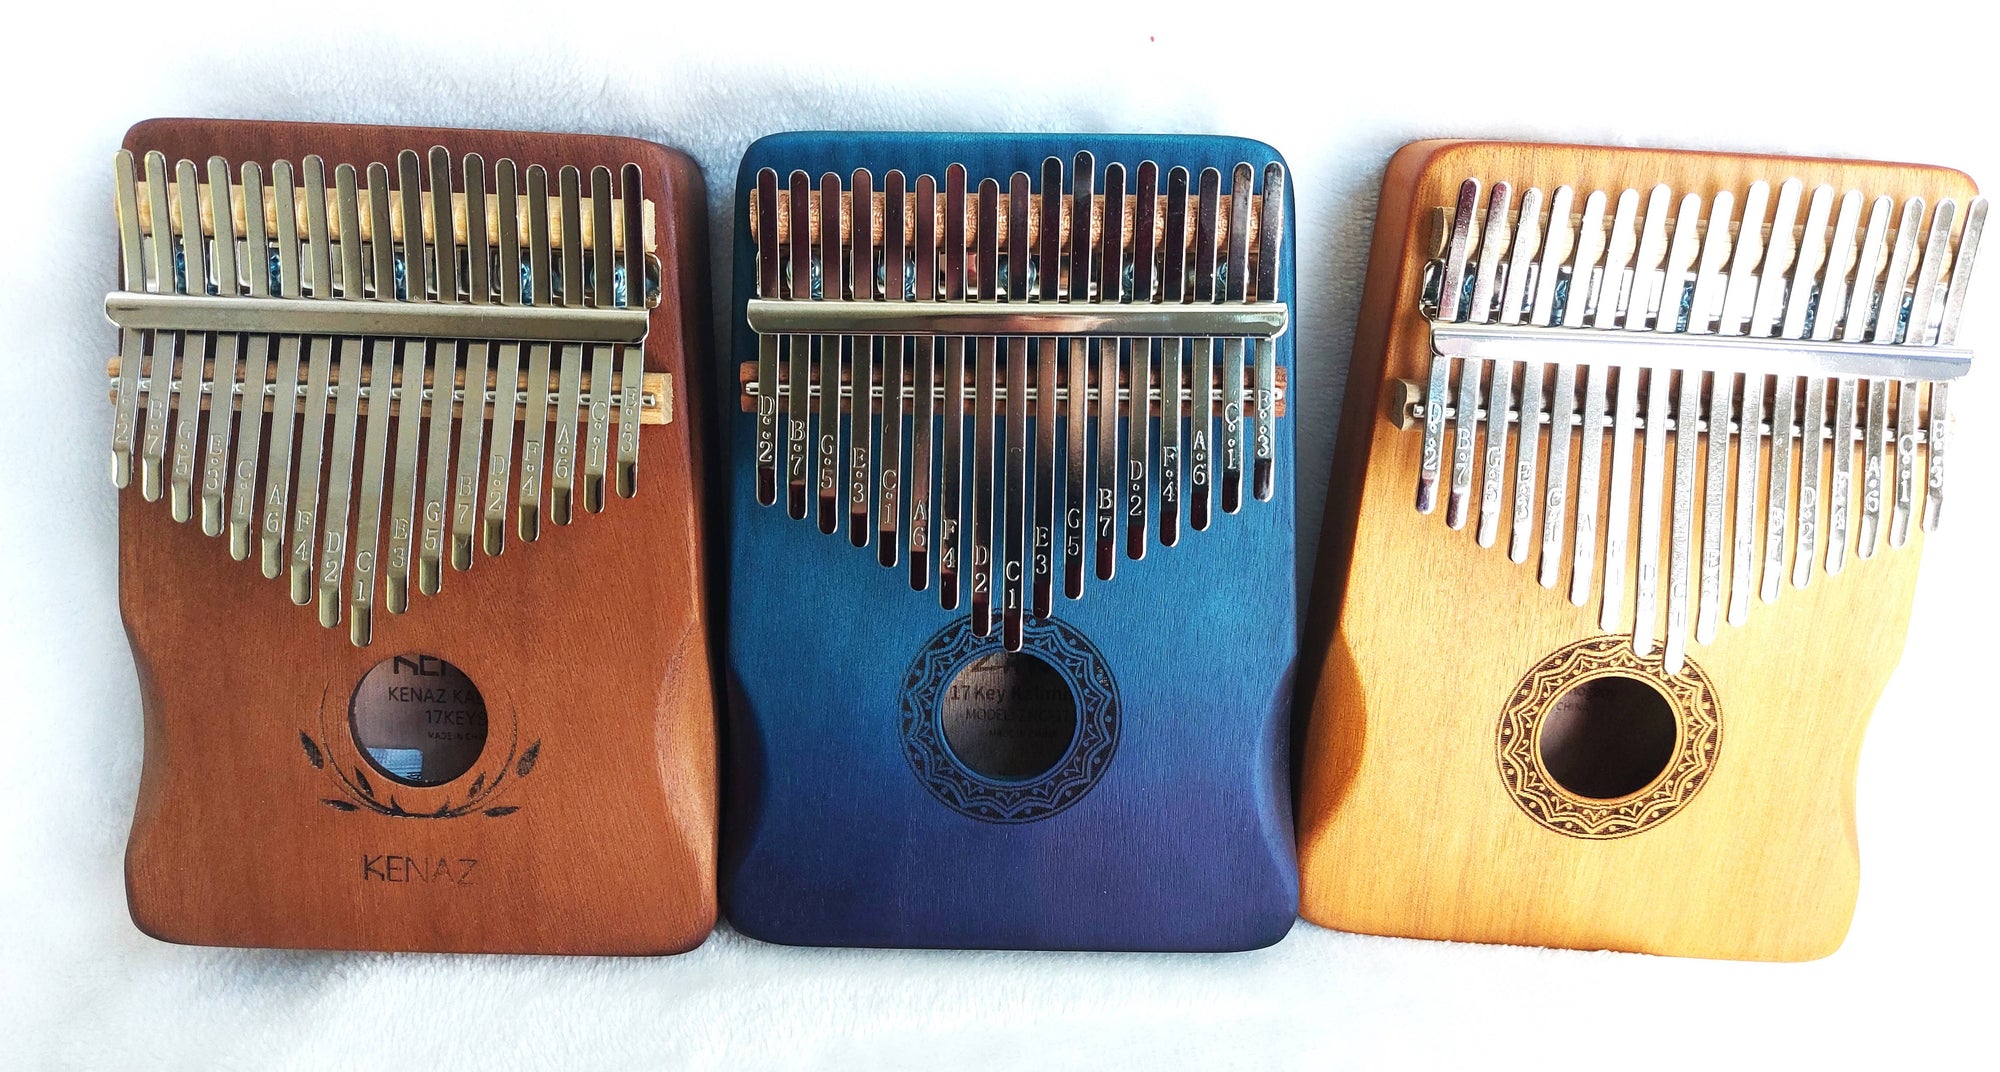 Three Kalimba Musical Instruments with varying wood tones (light, blue, and medium brown) displayed on a white surface, each with metal tines and decorative sound holes.